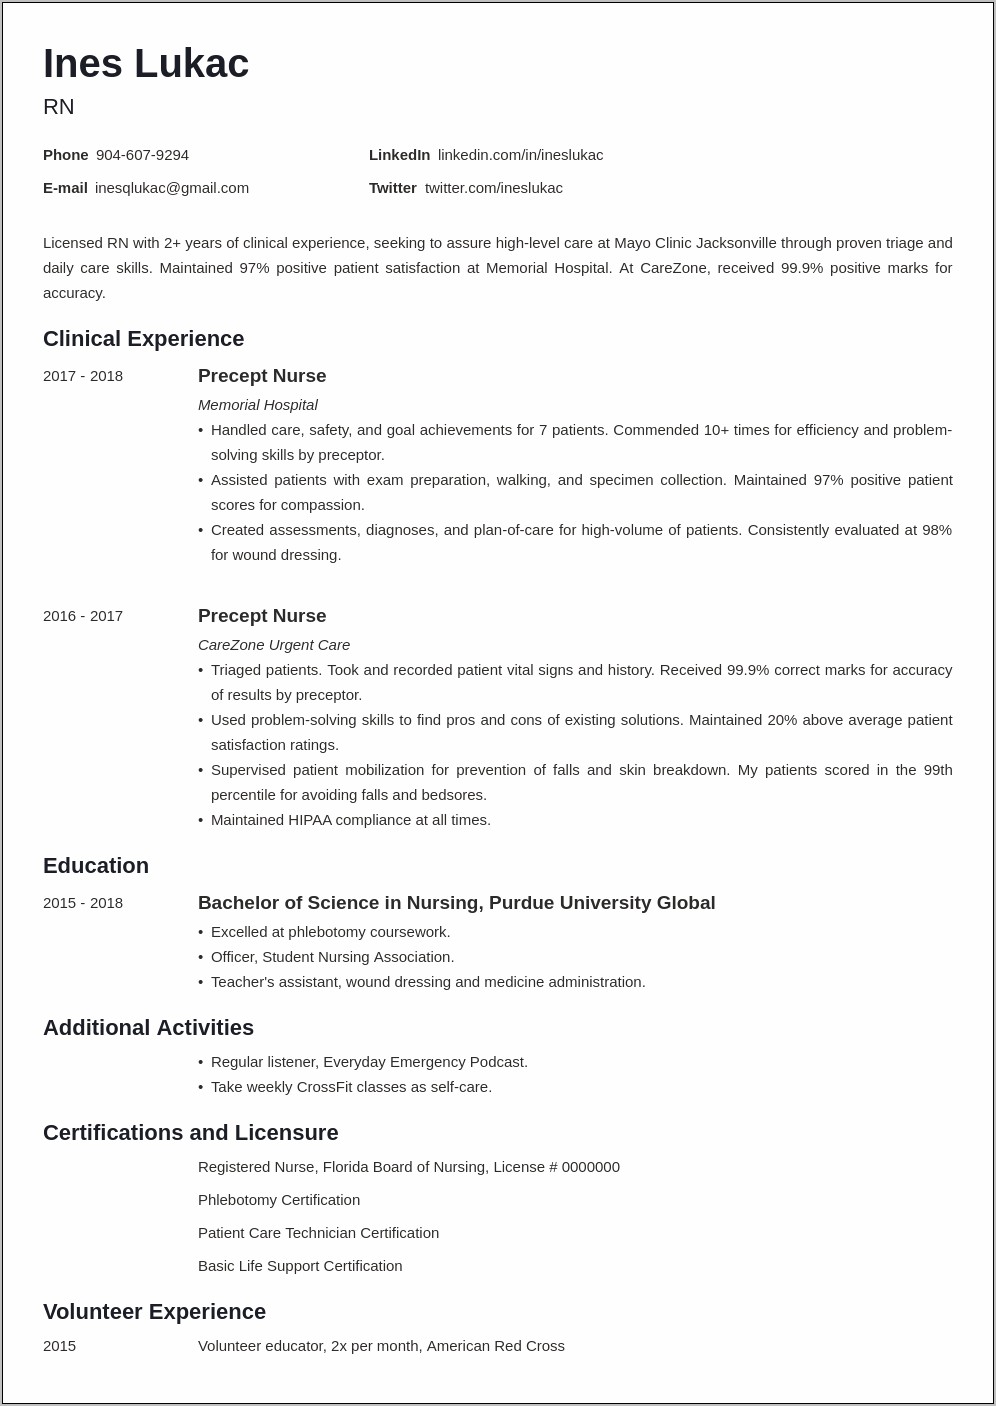 Sample Student Resume With Objective